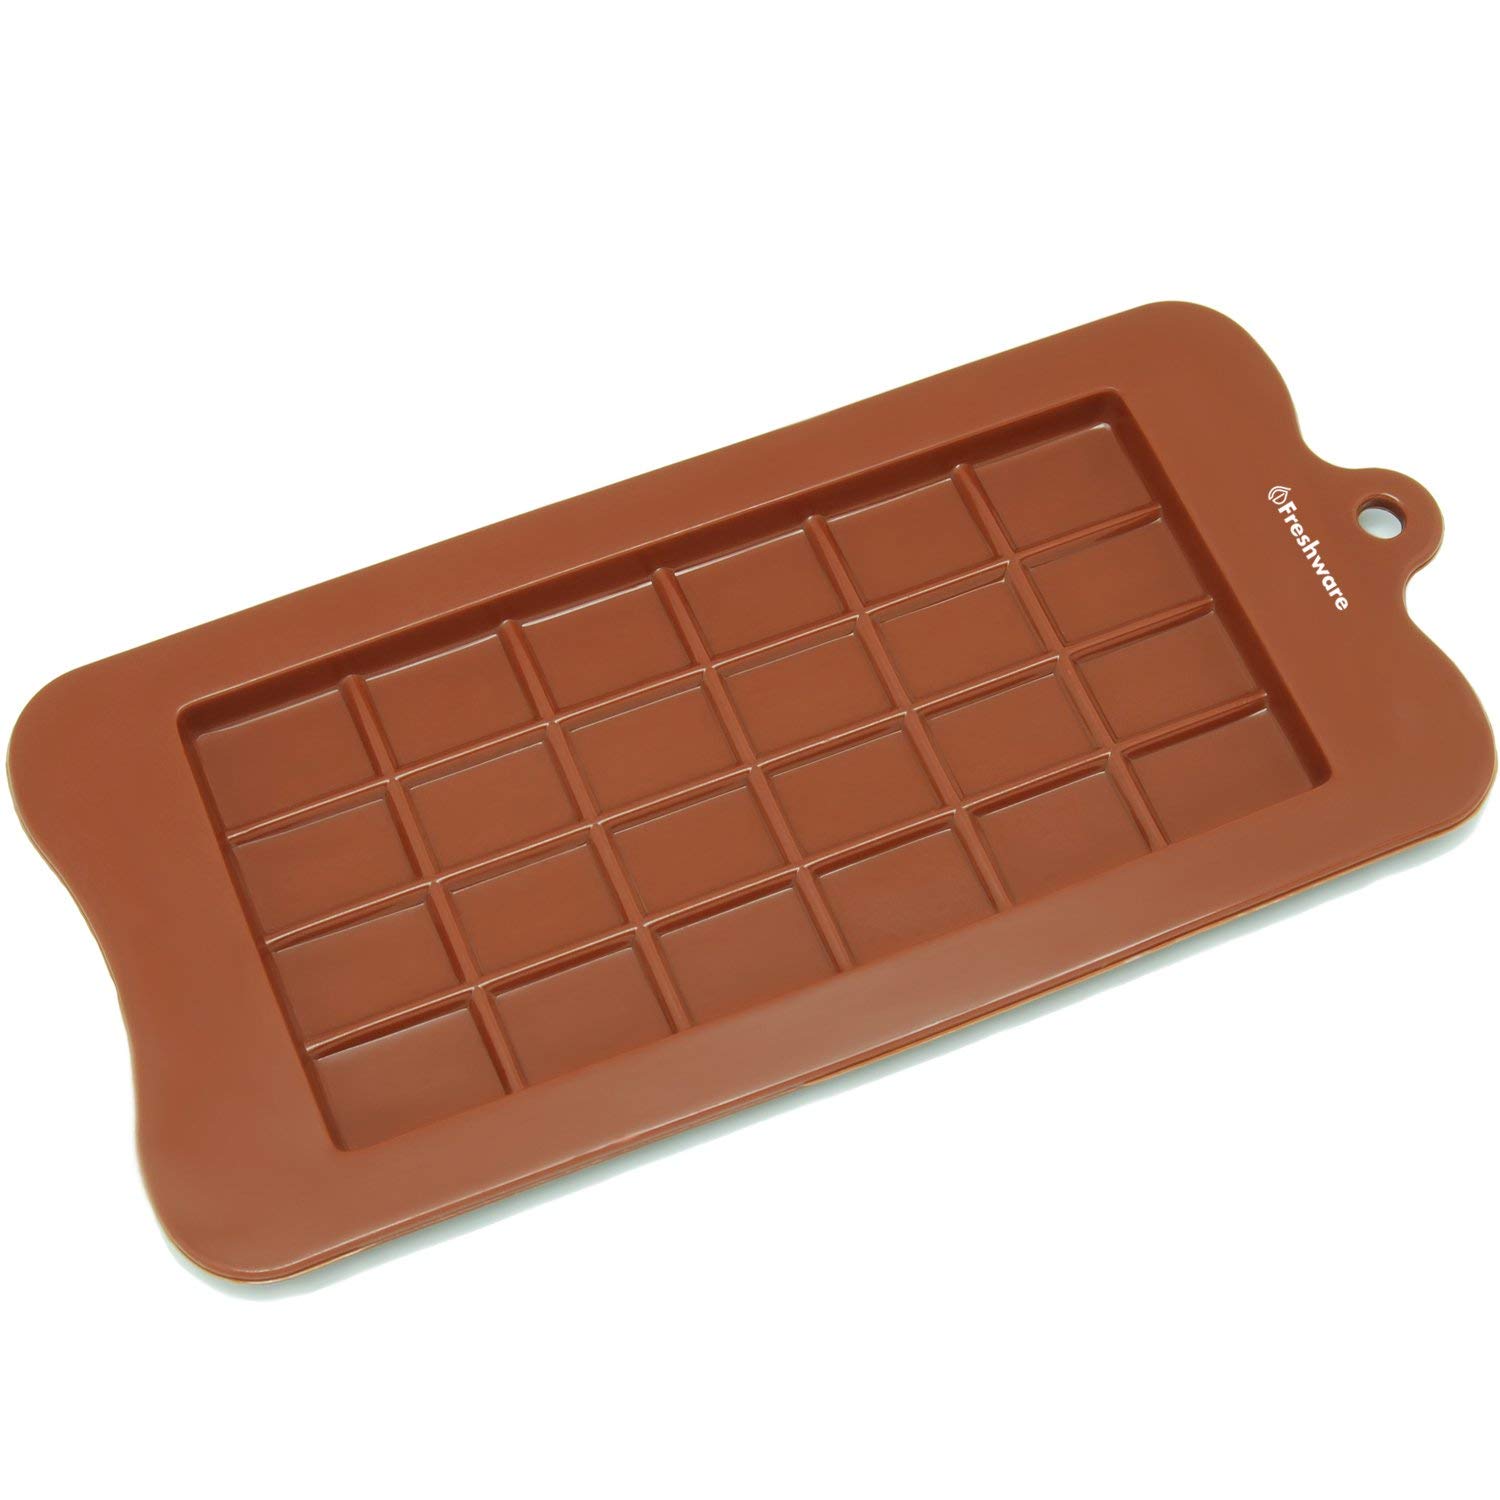 Freshware CB-607BR Silicone Break-Apart Chocolate, Protein and Energy Bar Mold Brown